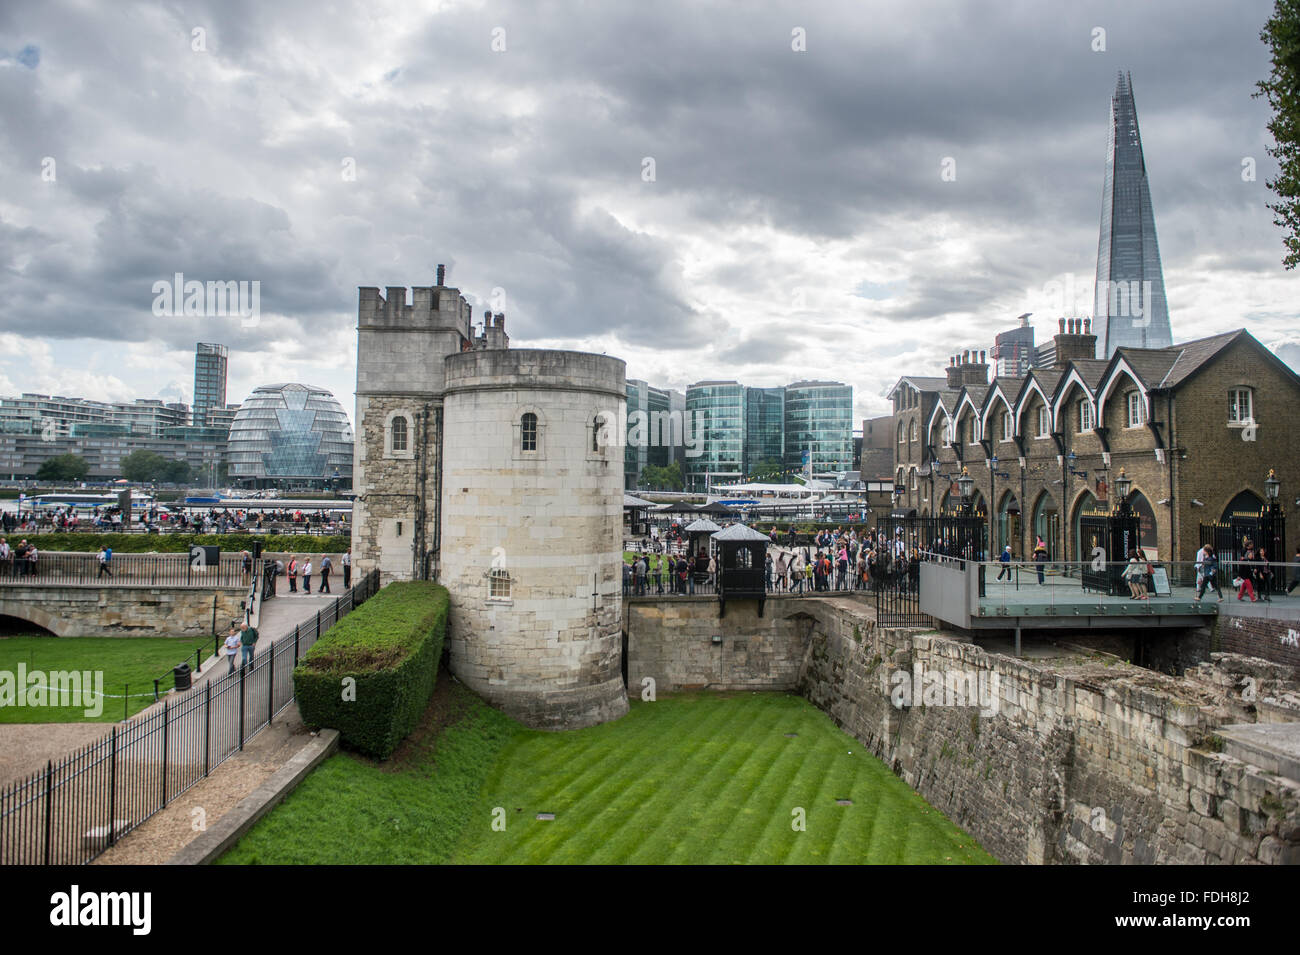 Tour group outside of the Tower of London in London, England. Stock Photo